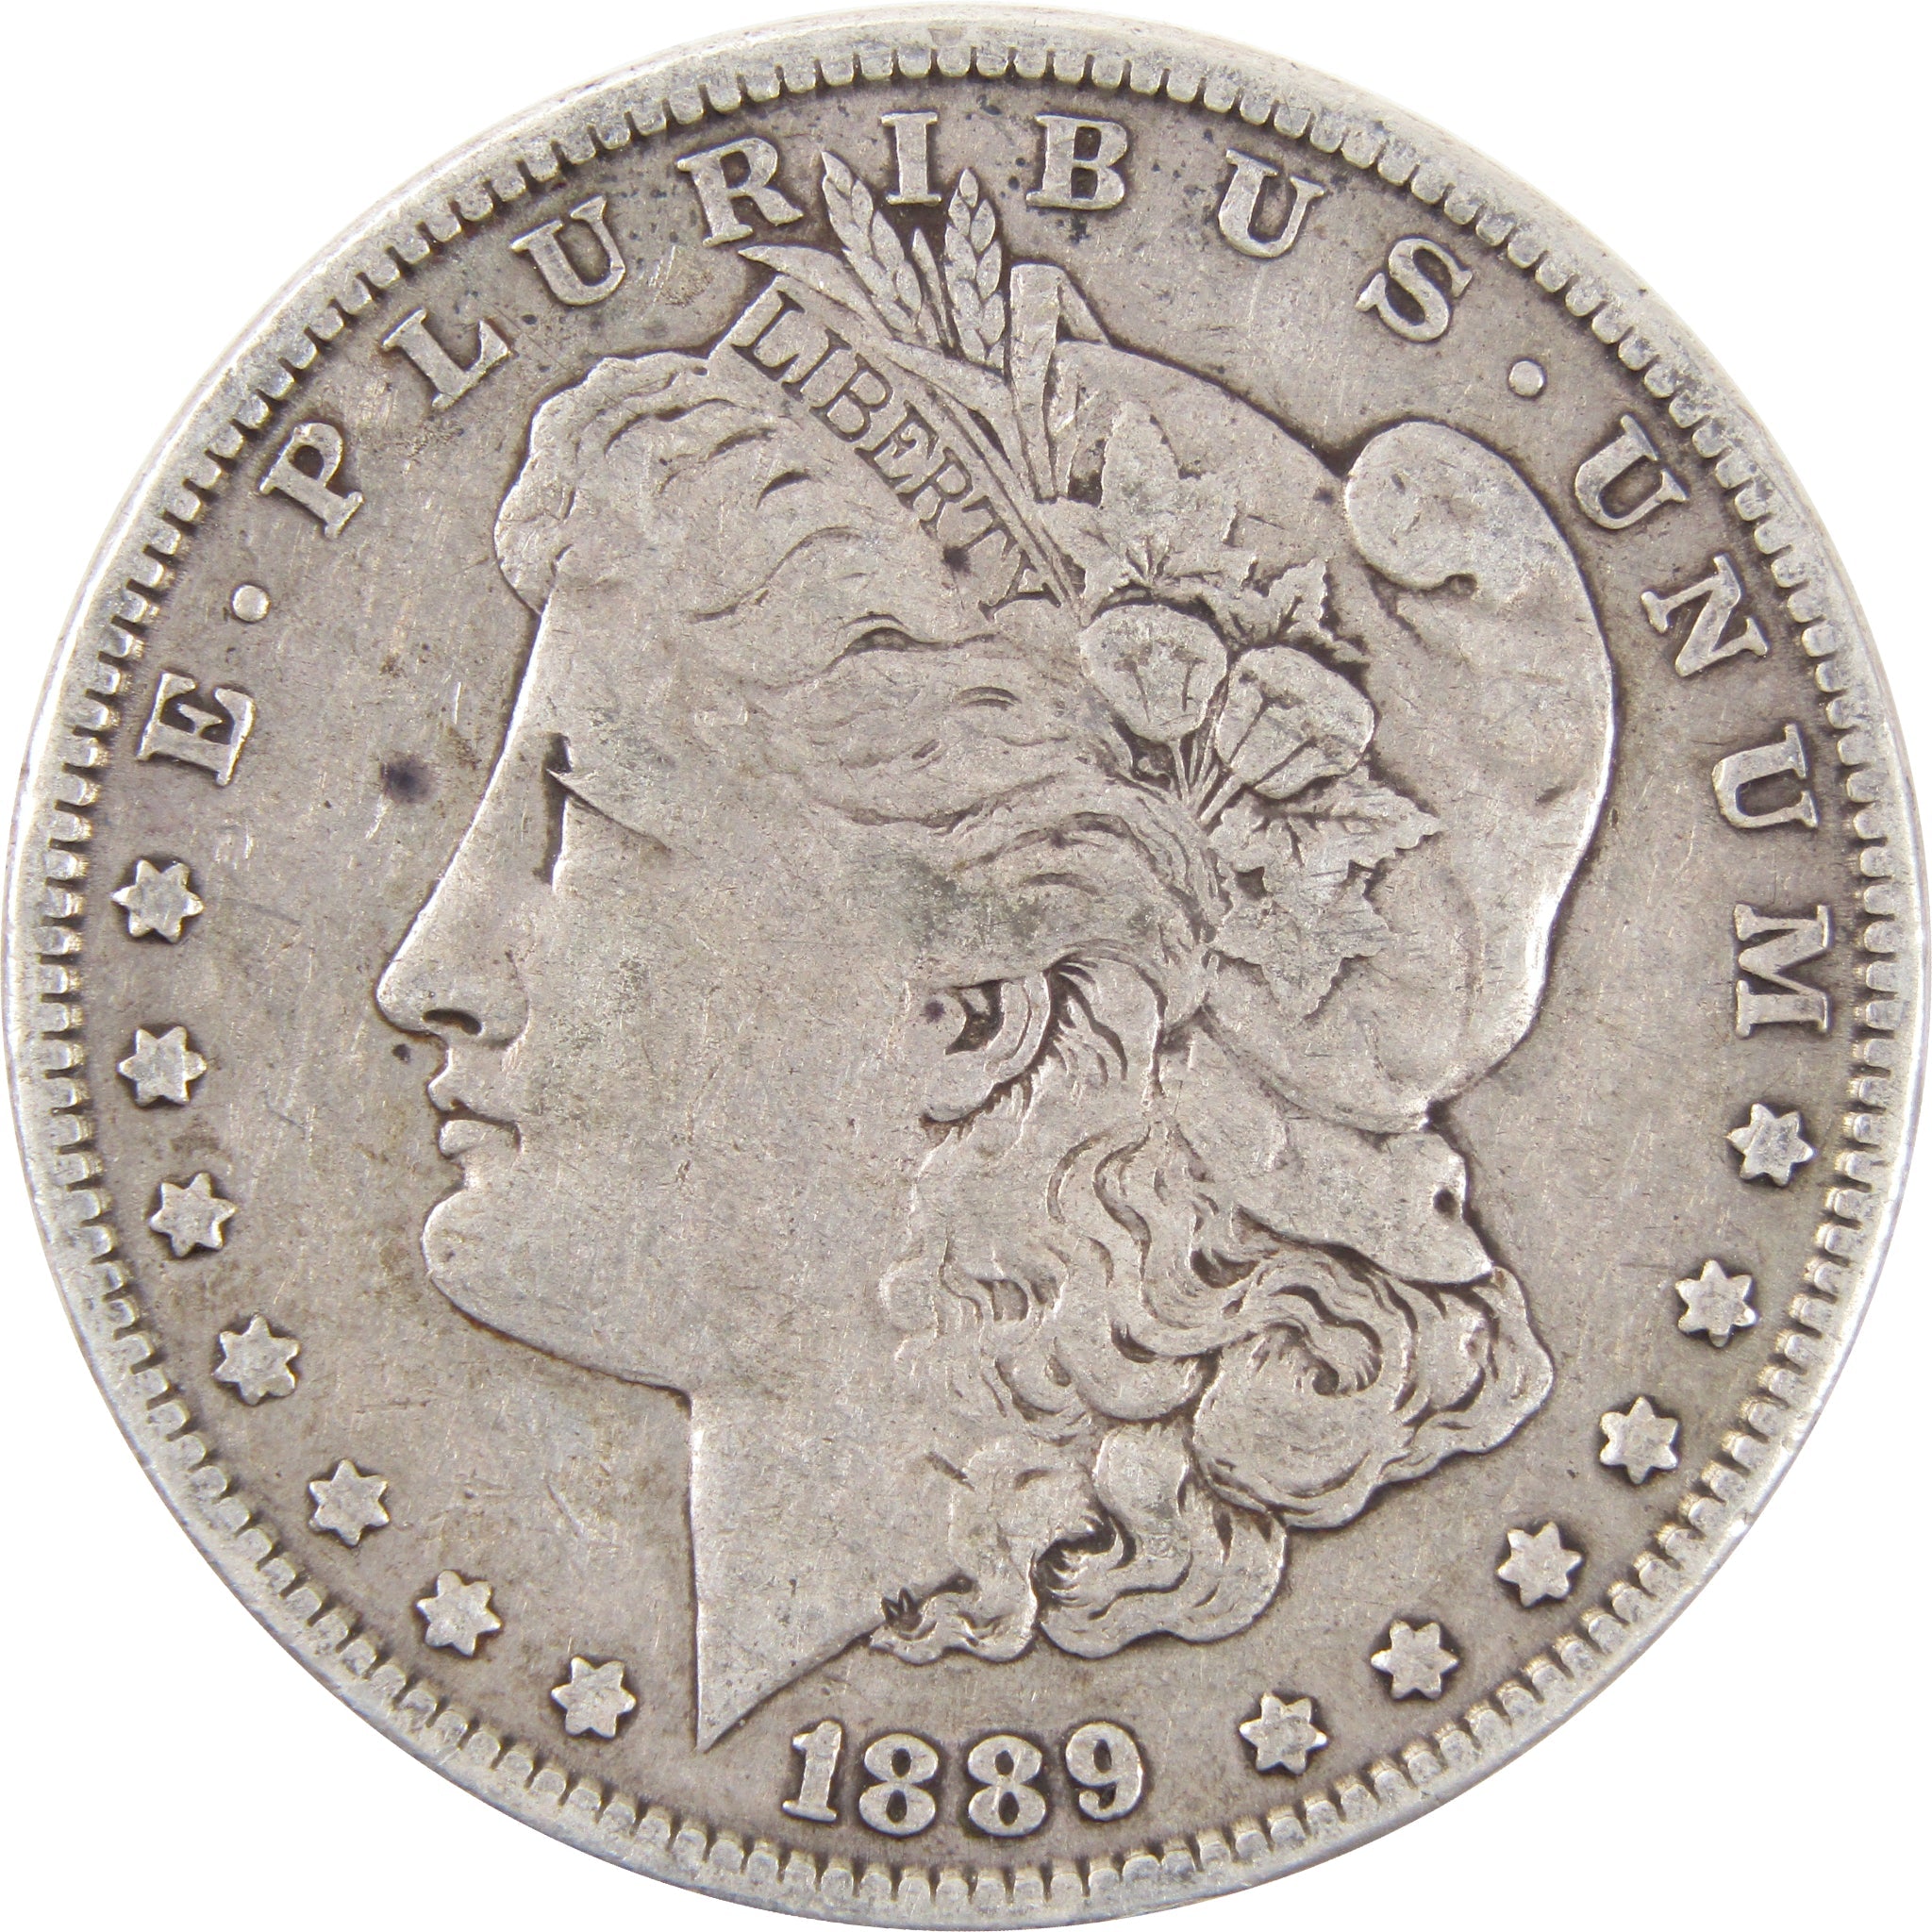 1889 Barwing Morgan Dollar F Fine 90% Silver US Coin SKU:I2550 - Morgan coin - Morgan silver dollar - Morgan silver dollar for sale - Profile Coins &amp; Collectibles